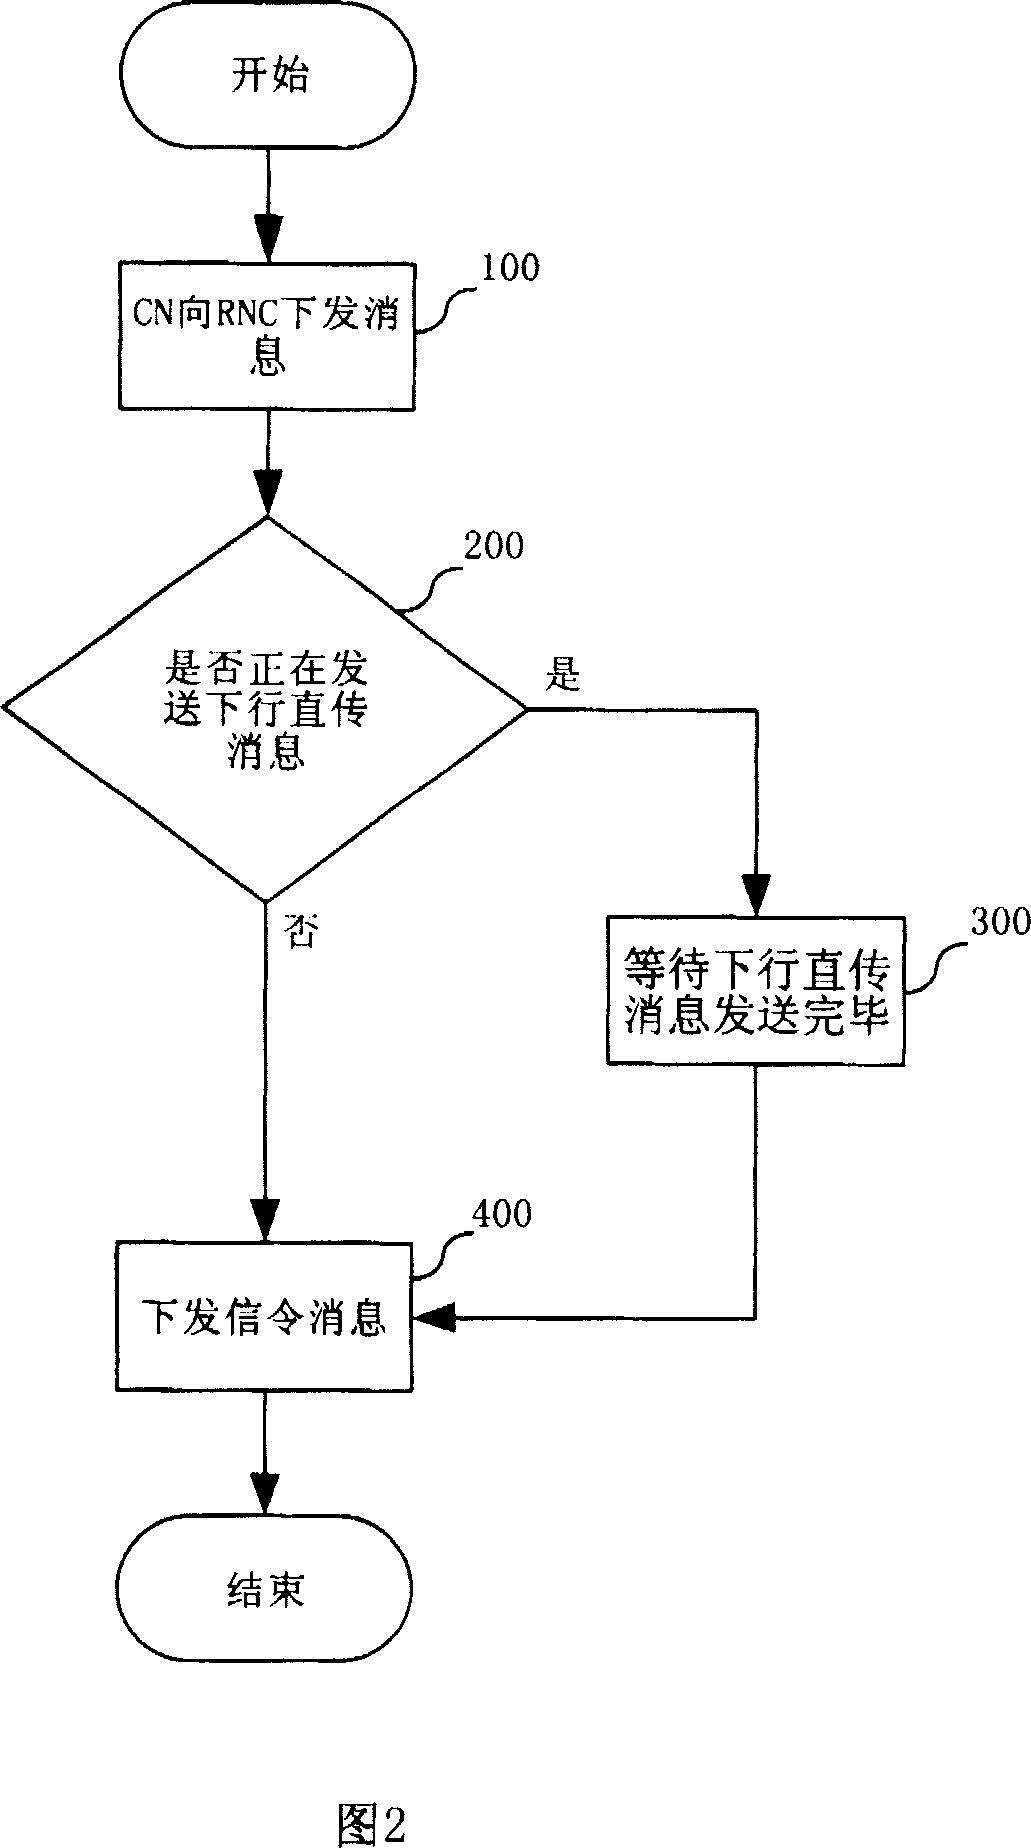 Method of time sequence control for access layer and non-access layer message